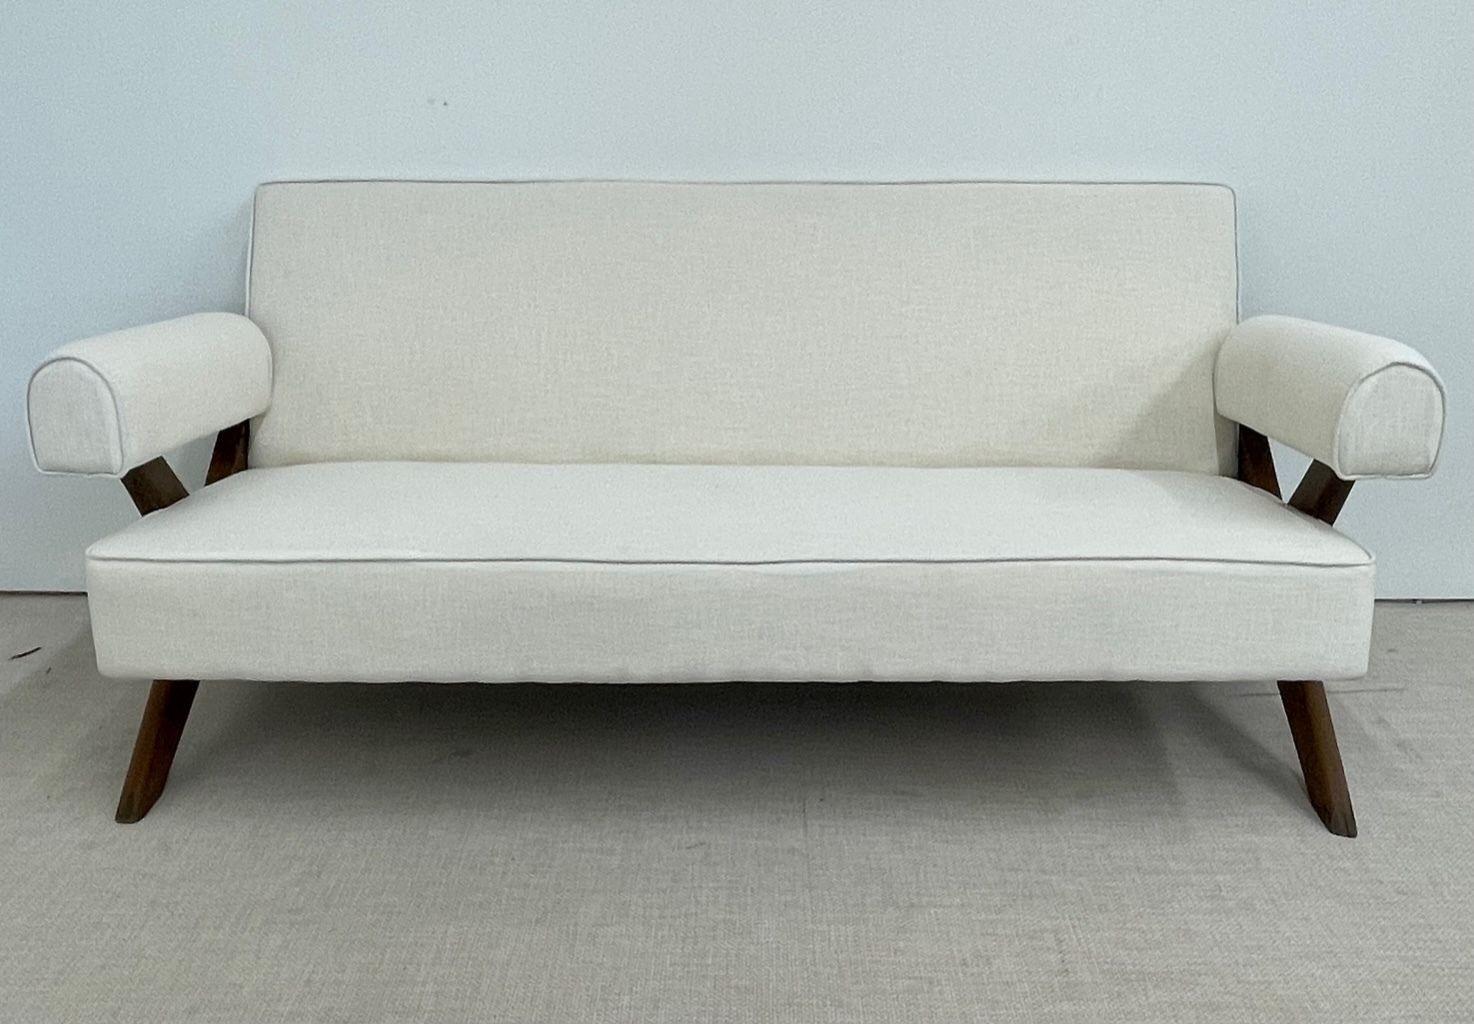 Pierre Jeanneret, French Mid-Century Modern, Upholstered Sofa, X-Leg, White Linen, India, 1960s

Rare sofa comprised of a slightly tilted backrest, seat, and armrests sitting on a double x-leg assembly base.
 
France/India c. 1960s
 
Each with